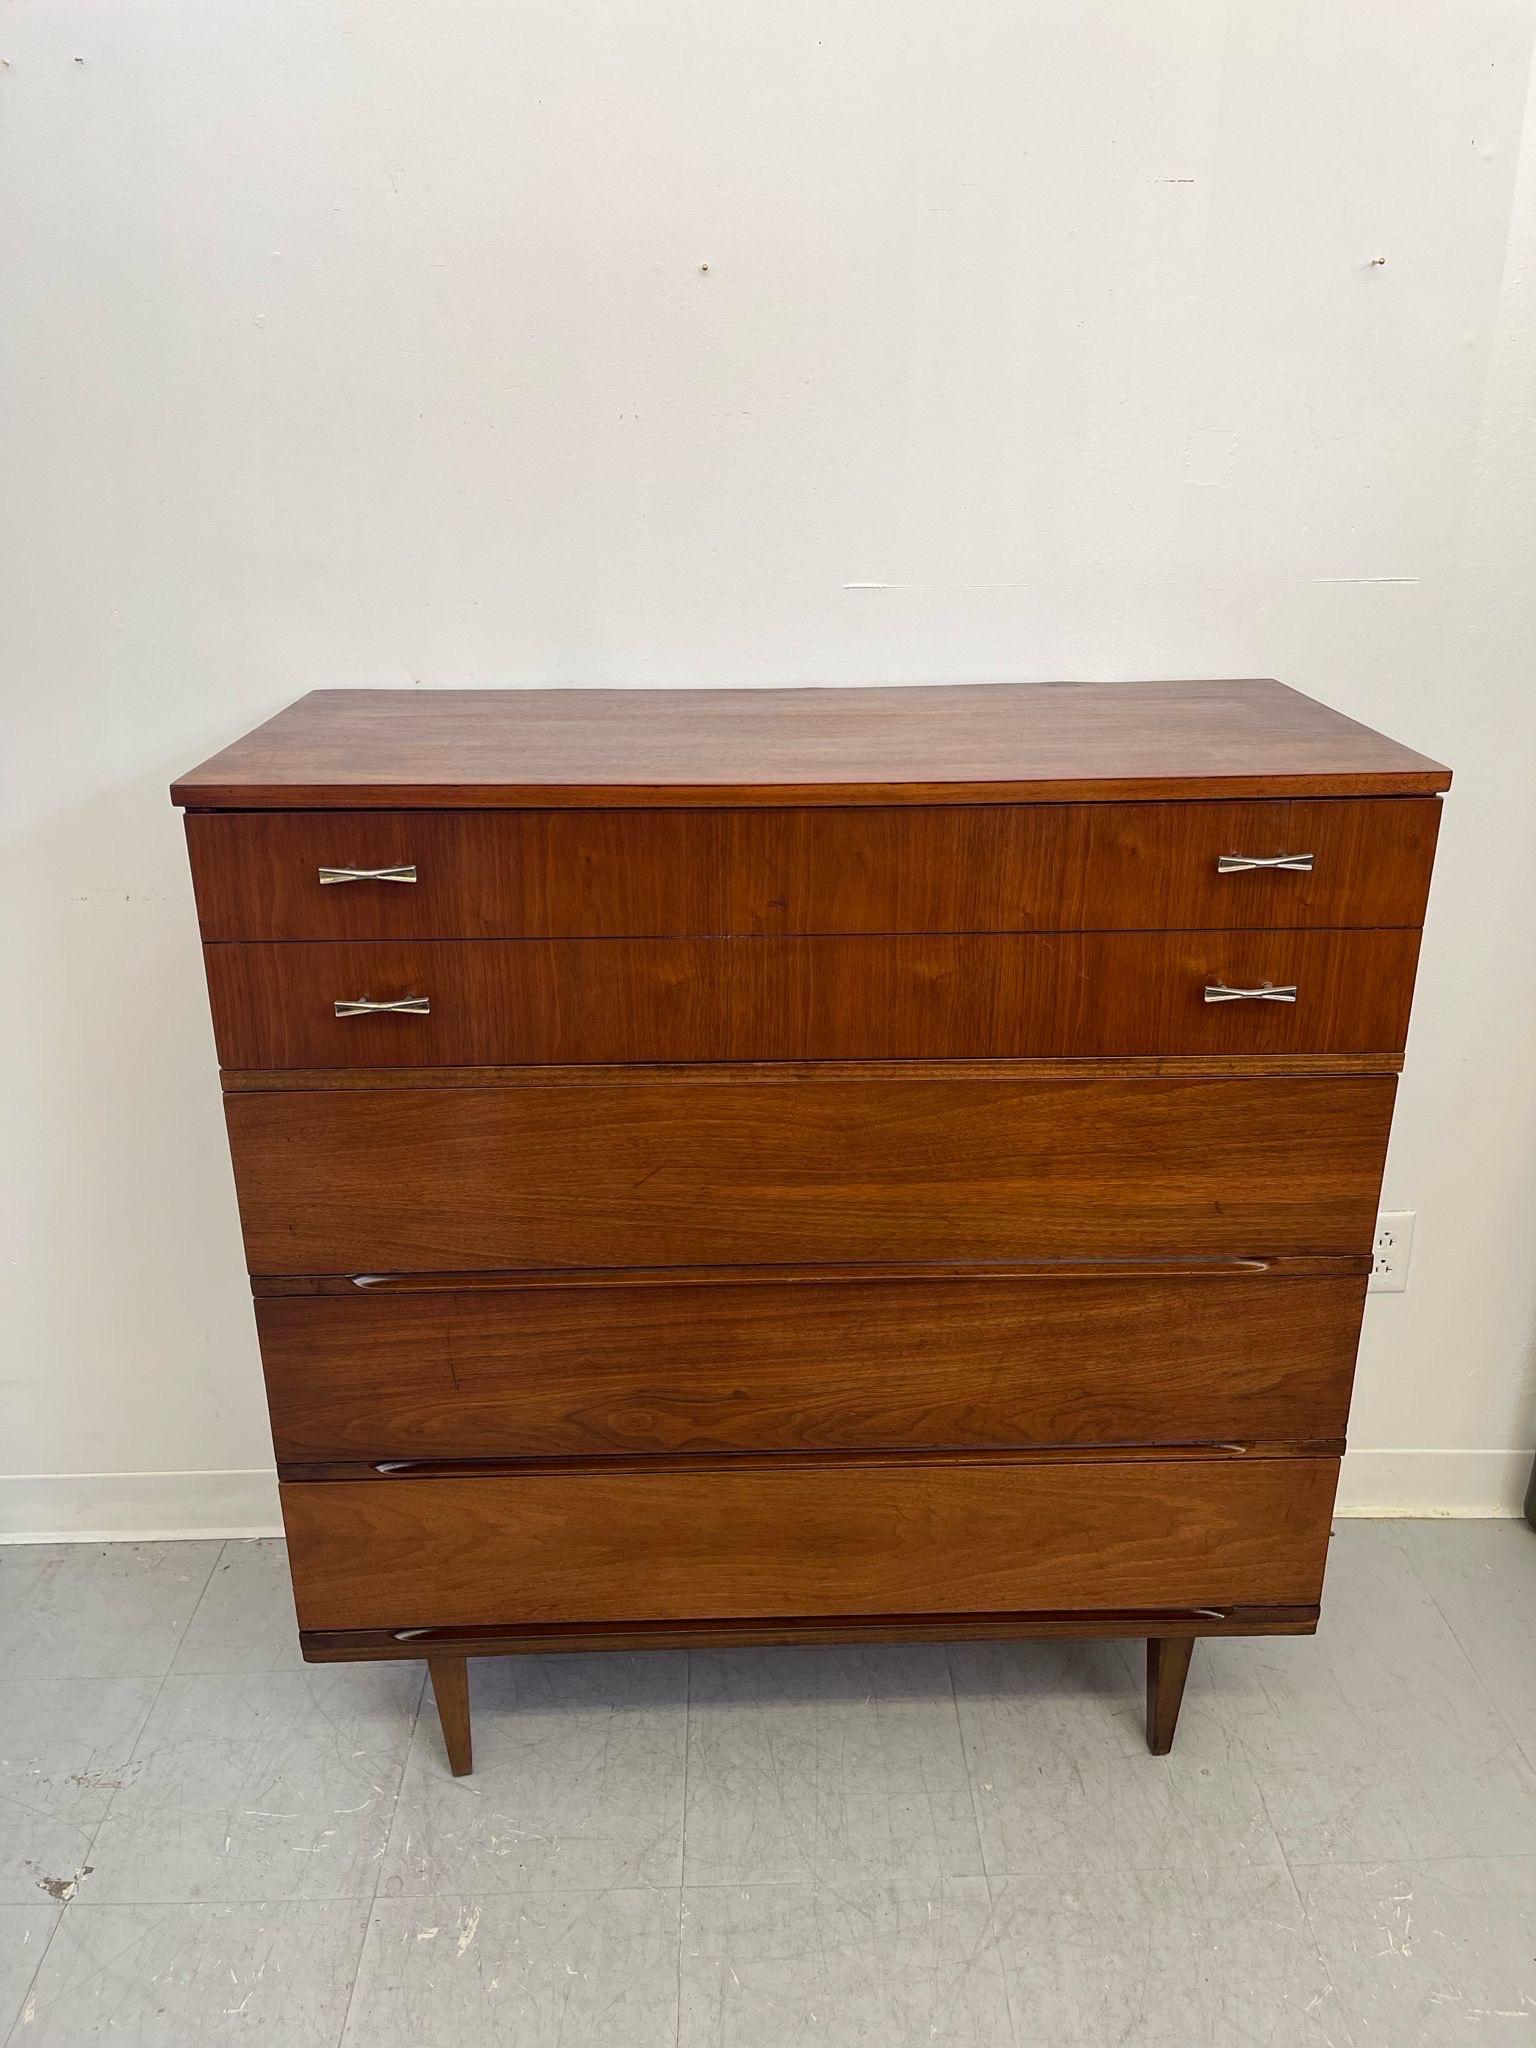 This Four Drawer Dresser features original hardware to the top Drawer and tapered legs. Classic Mid Century design by Harmony House. Makers mark on the inside of the drawer as pictured. Vintage Condition Consistent with Age as Pictured.

Dimensions.